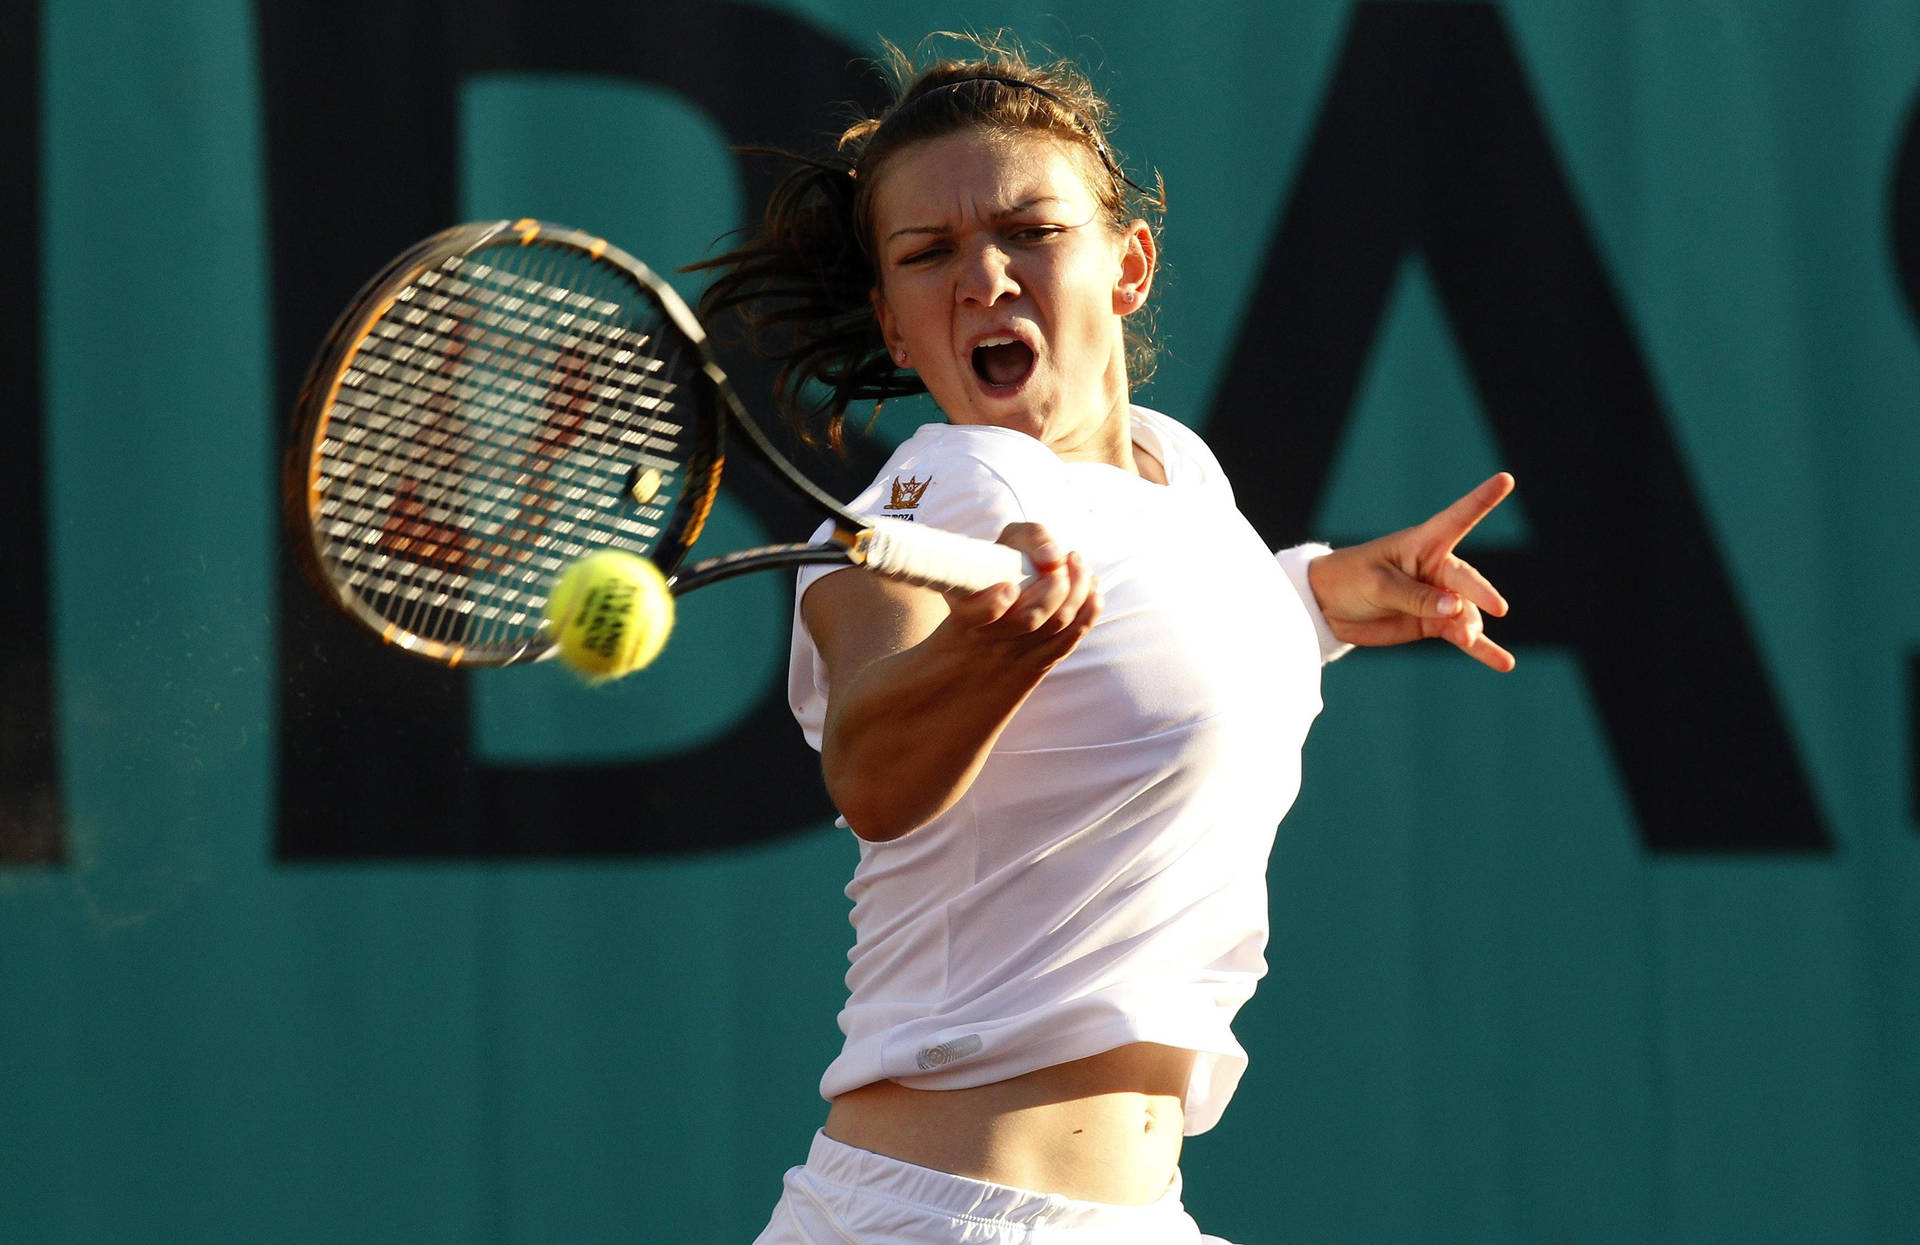 Simona Halep in Action during a Tennis Match Wallpaper